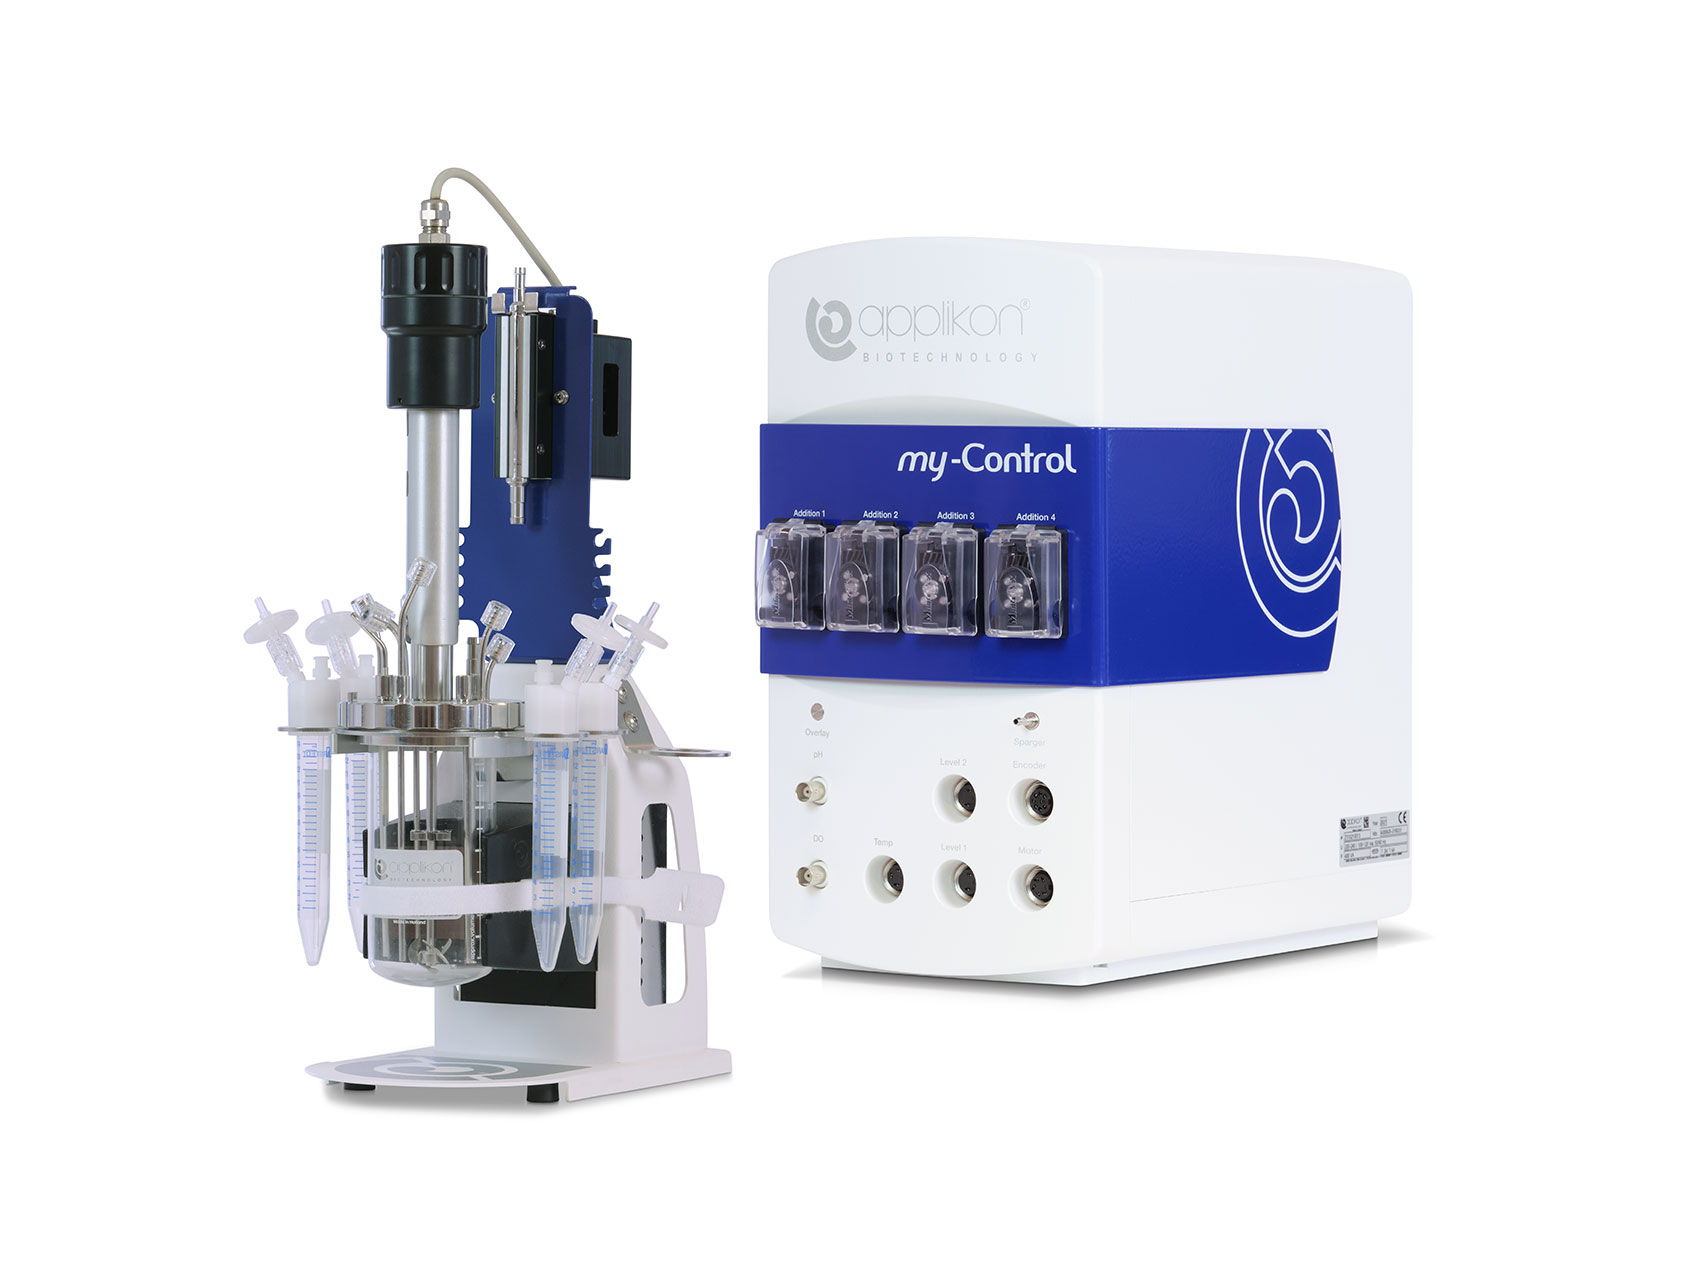 The Applikon miniBio system consisting of stirred tank bioreactor, controller and sensors